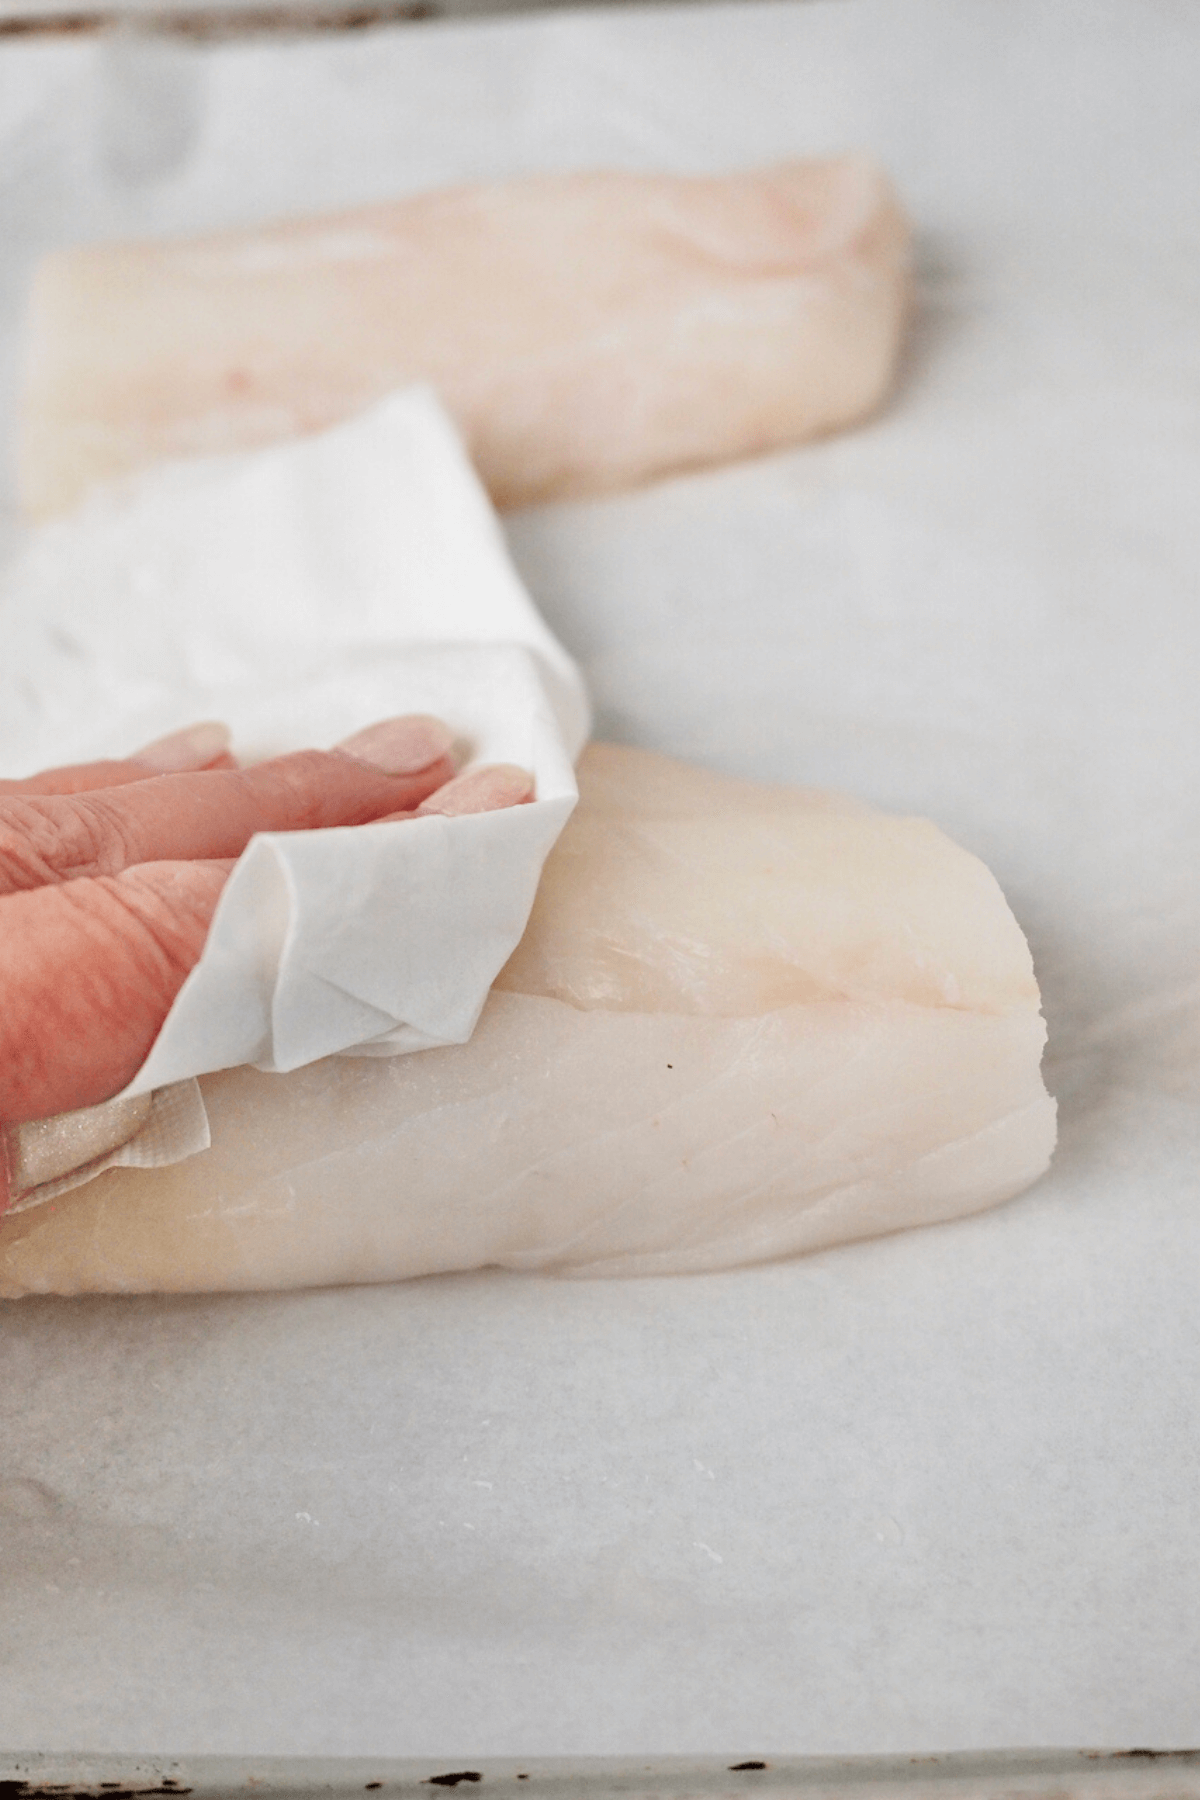 Pat dry the cod with paper towels. 